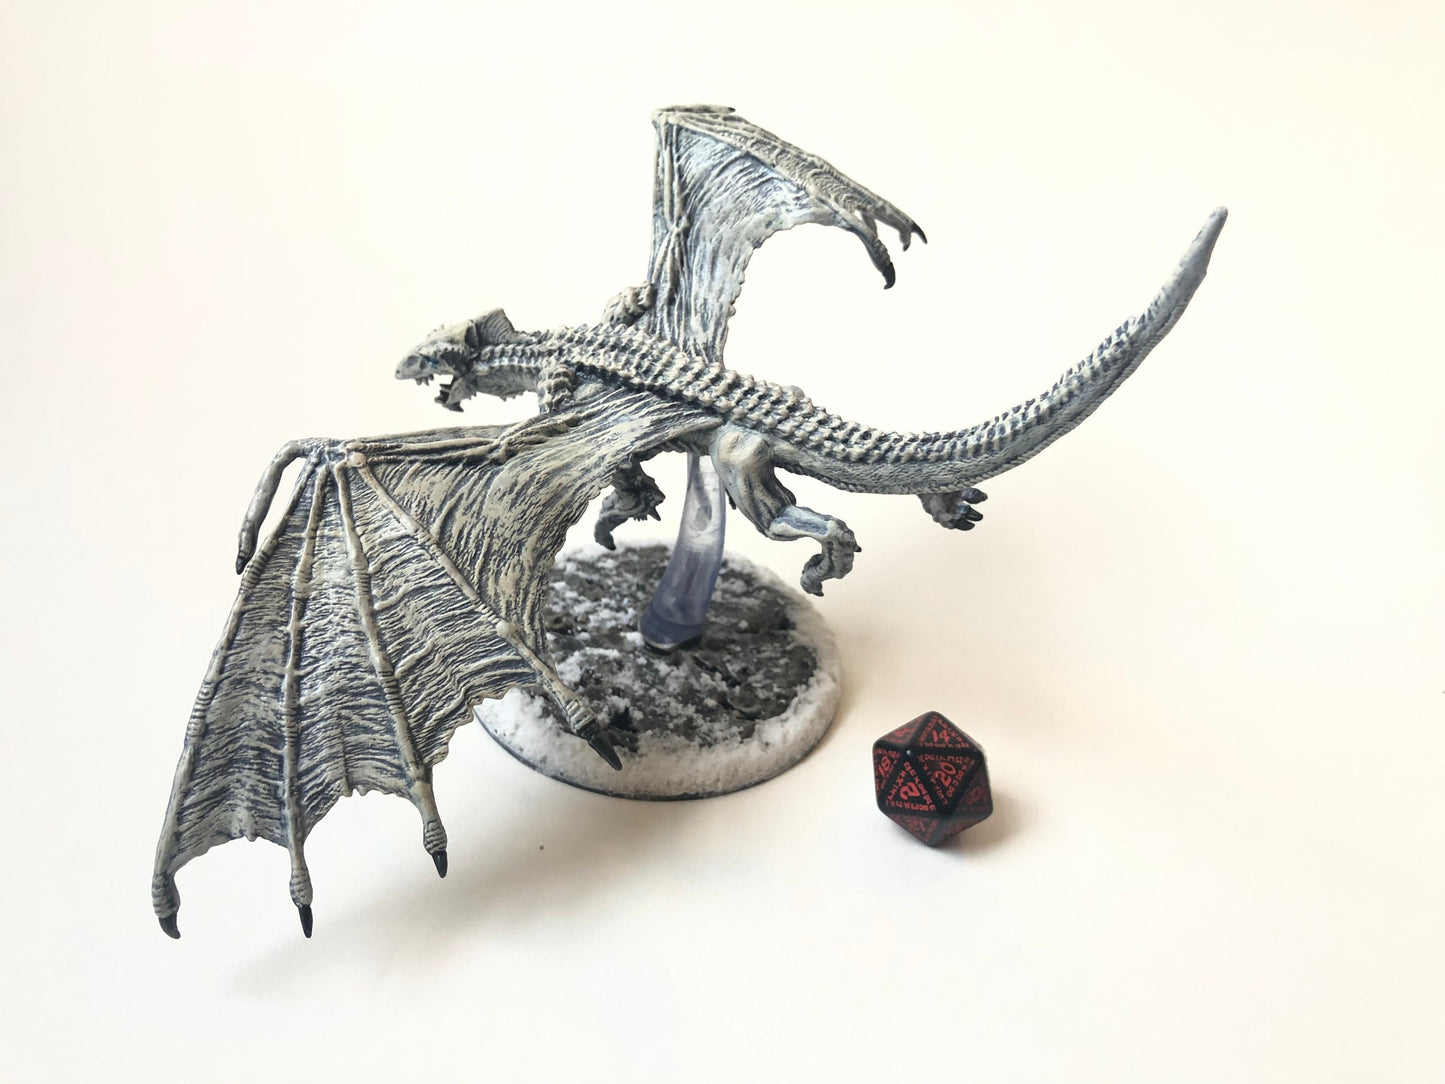 Young White Dragon High Quality Painted D&D Mini